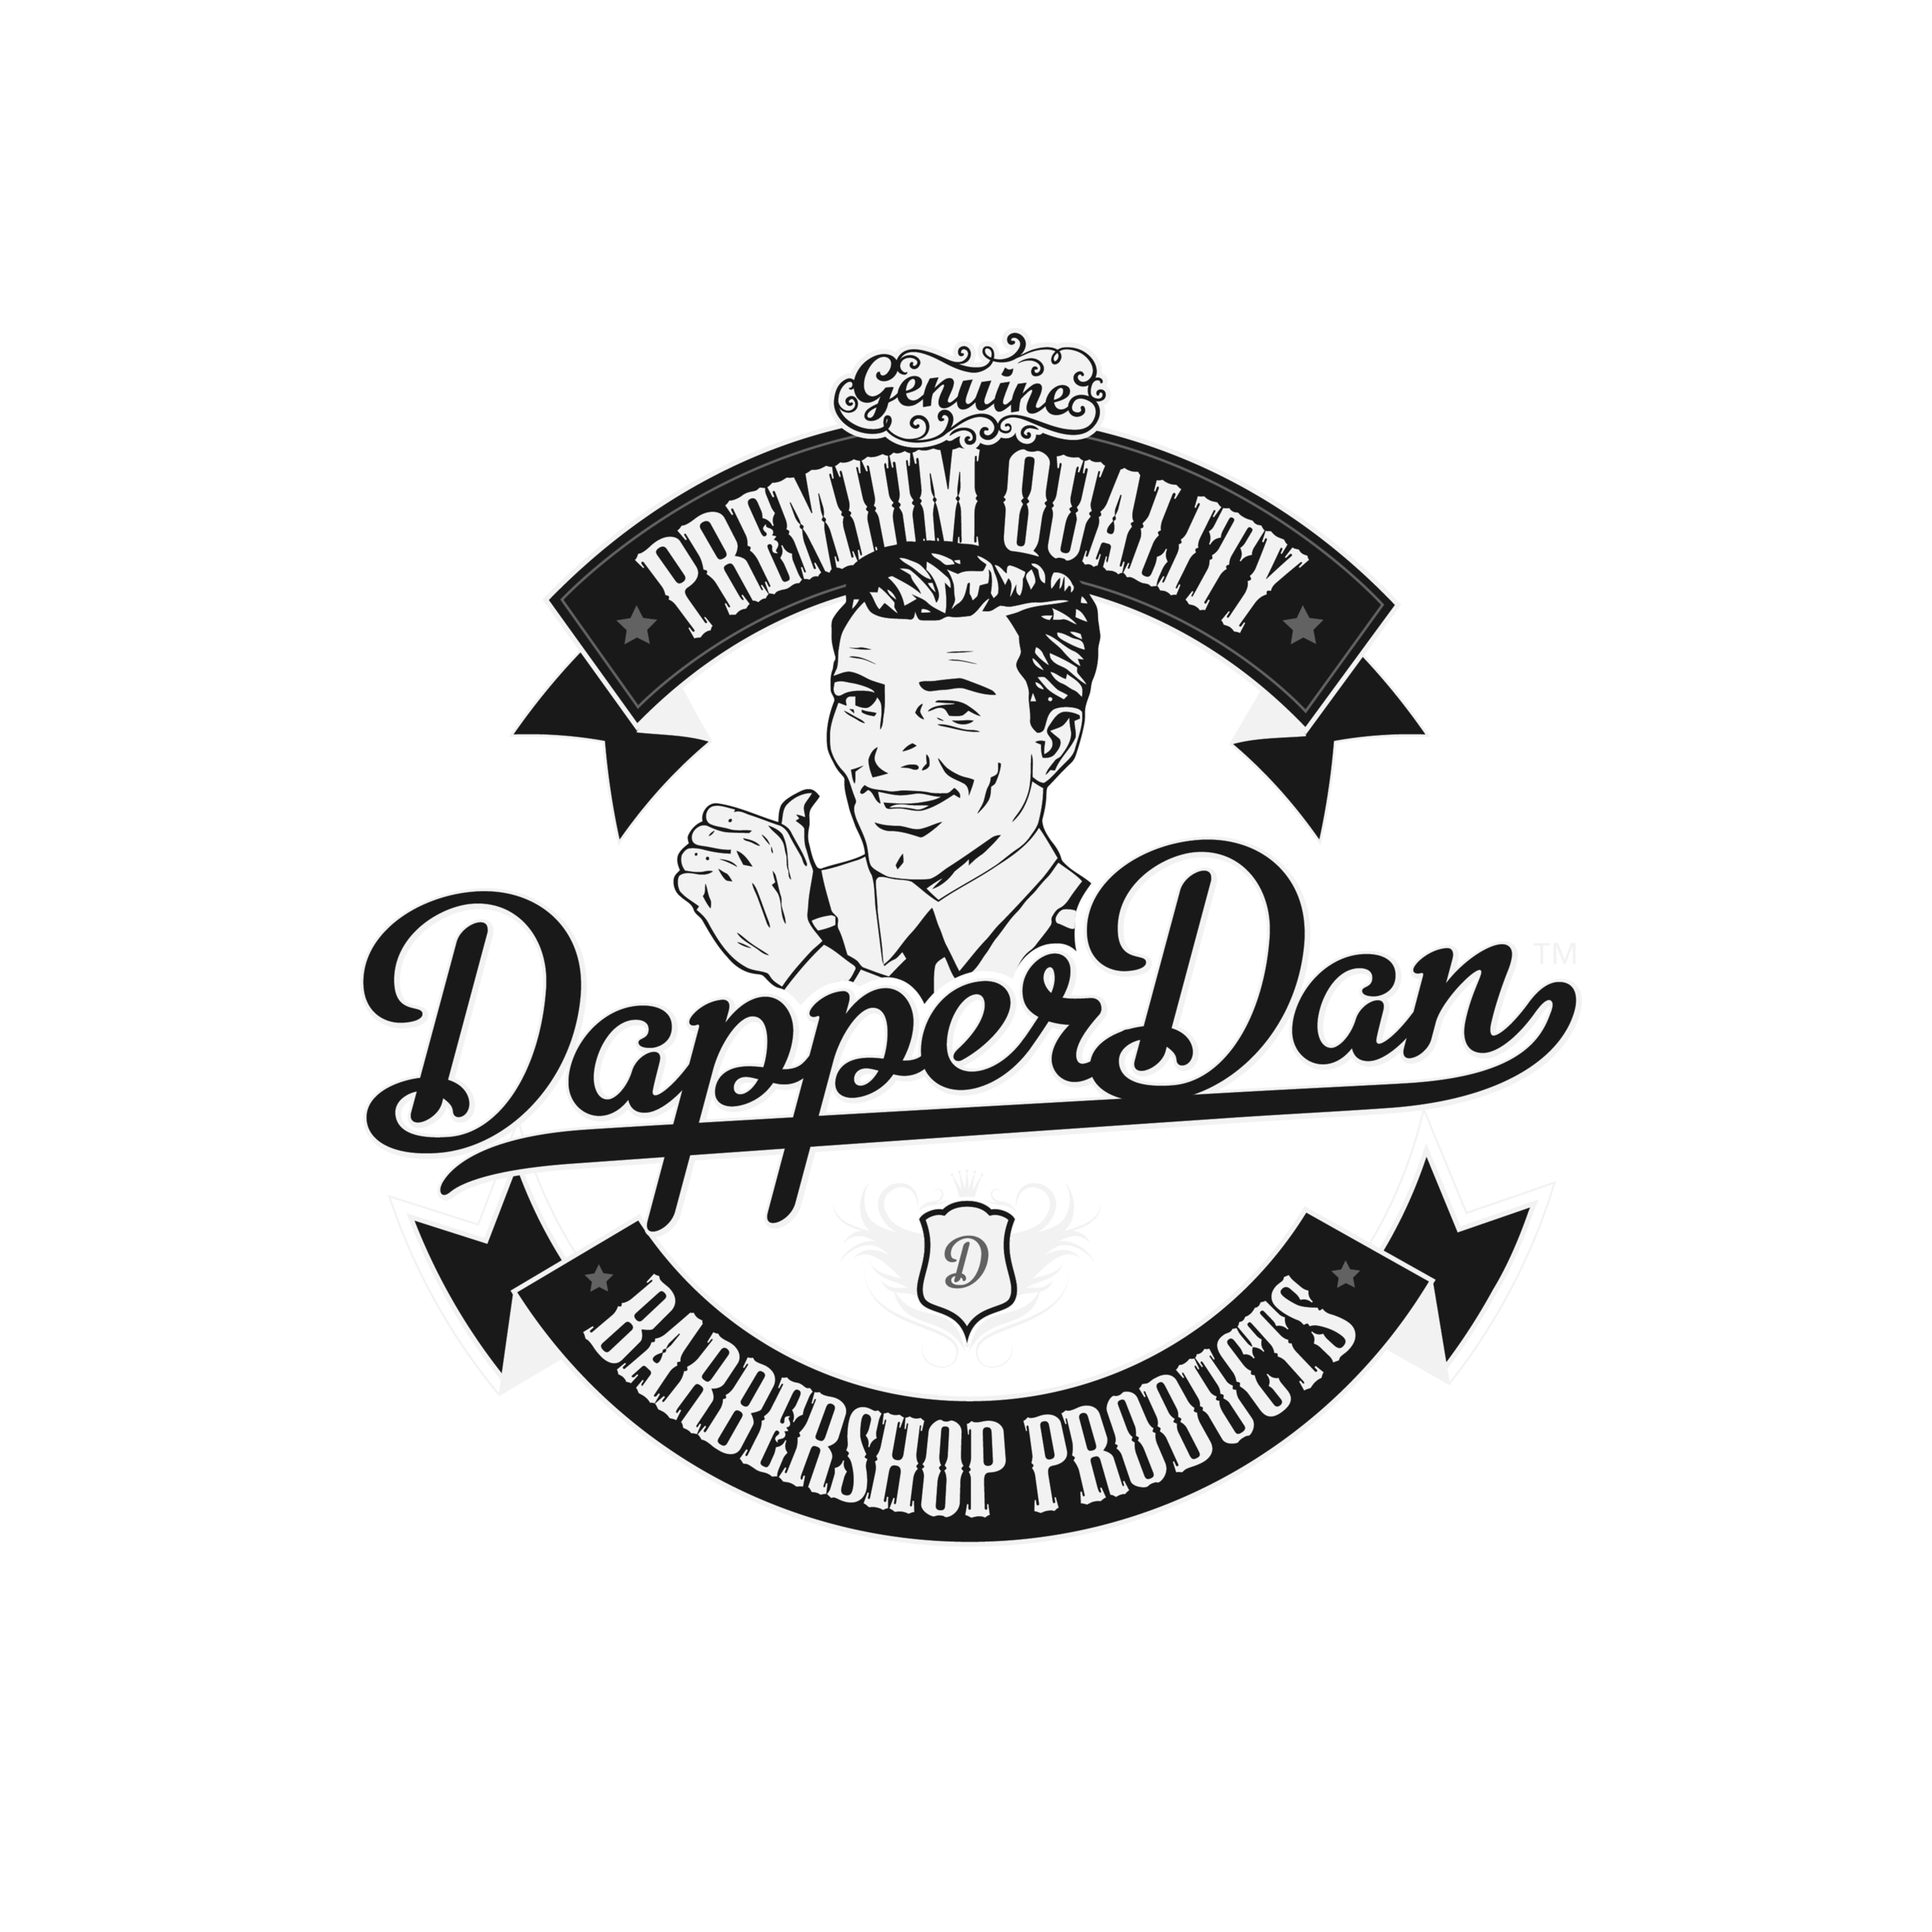 About Dapper Dan — THE GROOMING LAB